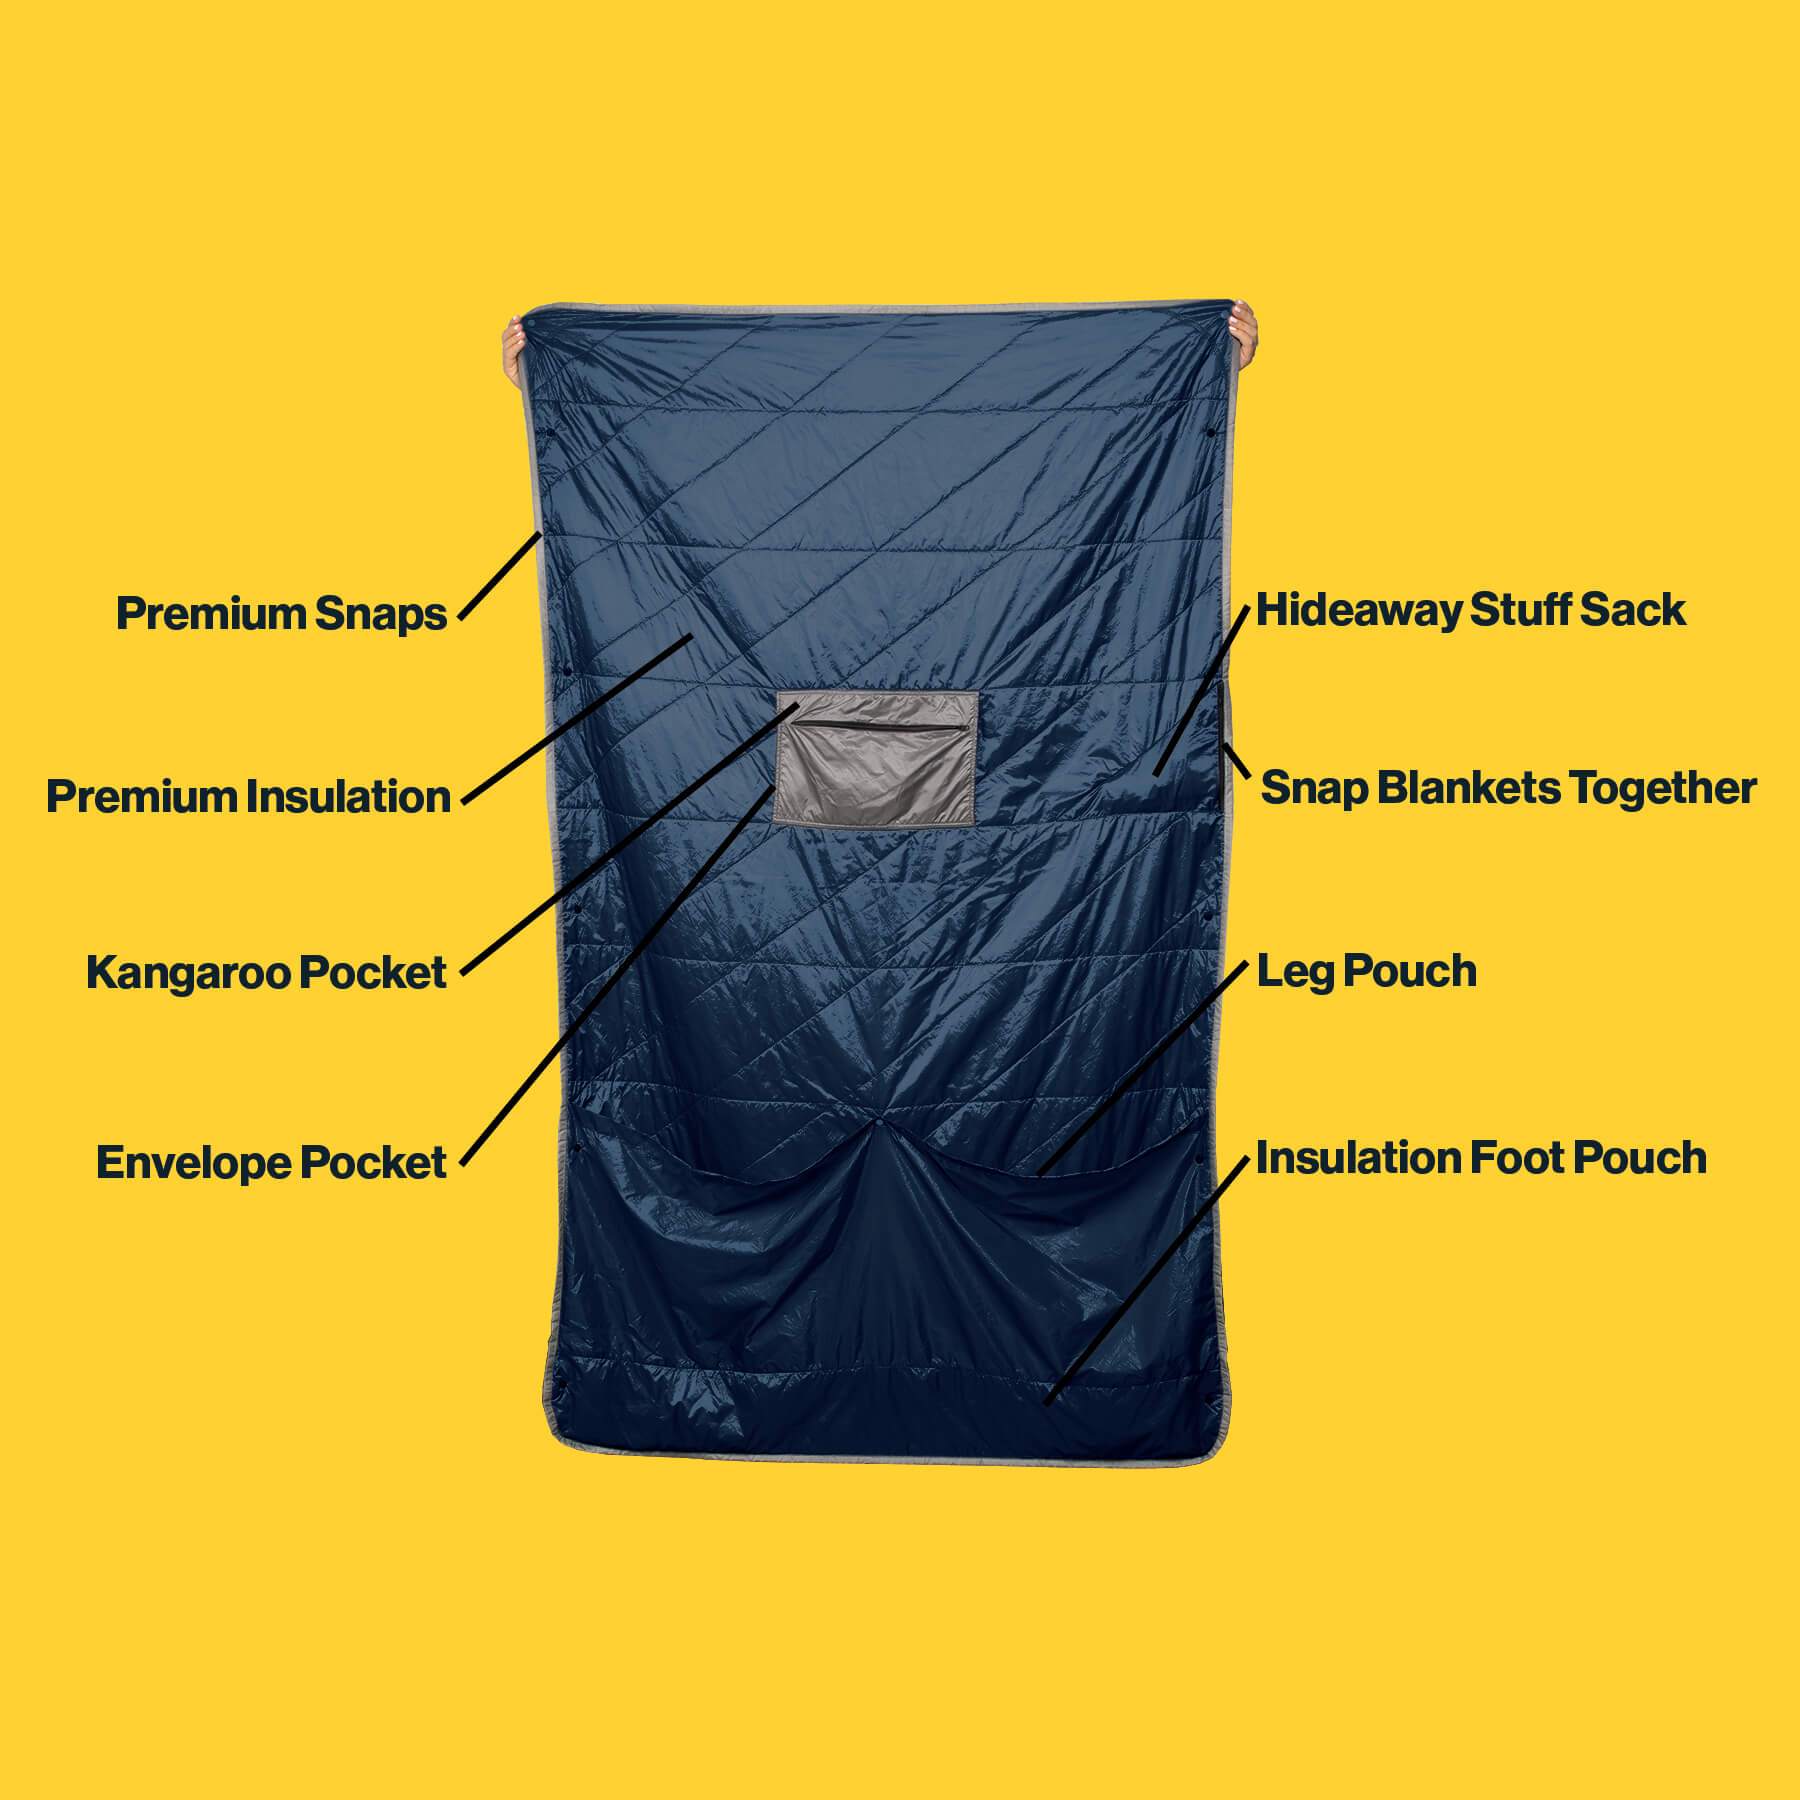 Blue Layover™ Travel Blanket - Packable & Insulated - Gravel - Blue Layover™ Travel Blanket - Packable & Insulated